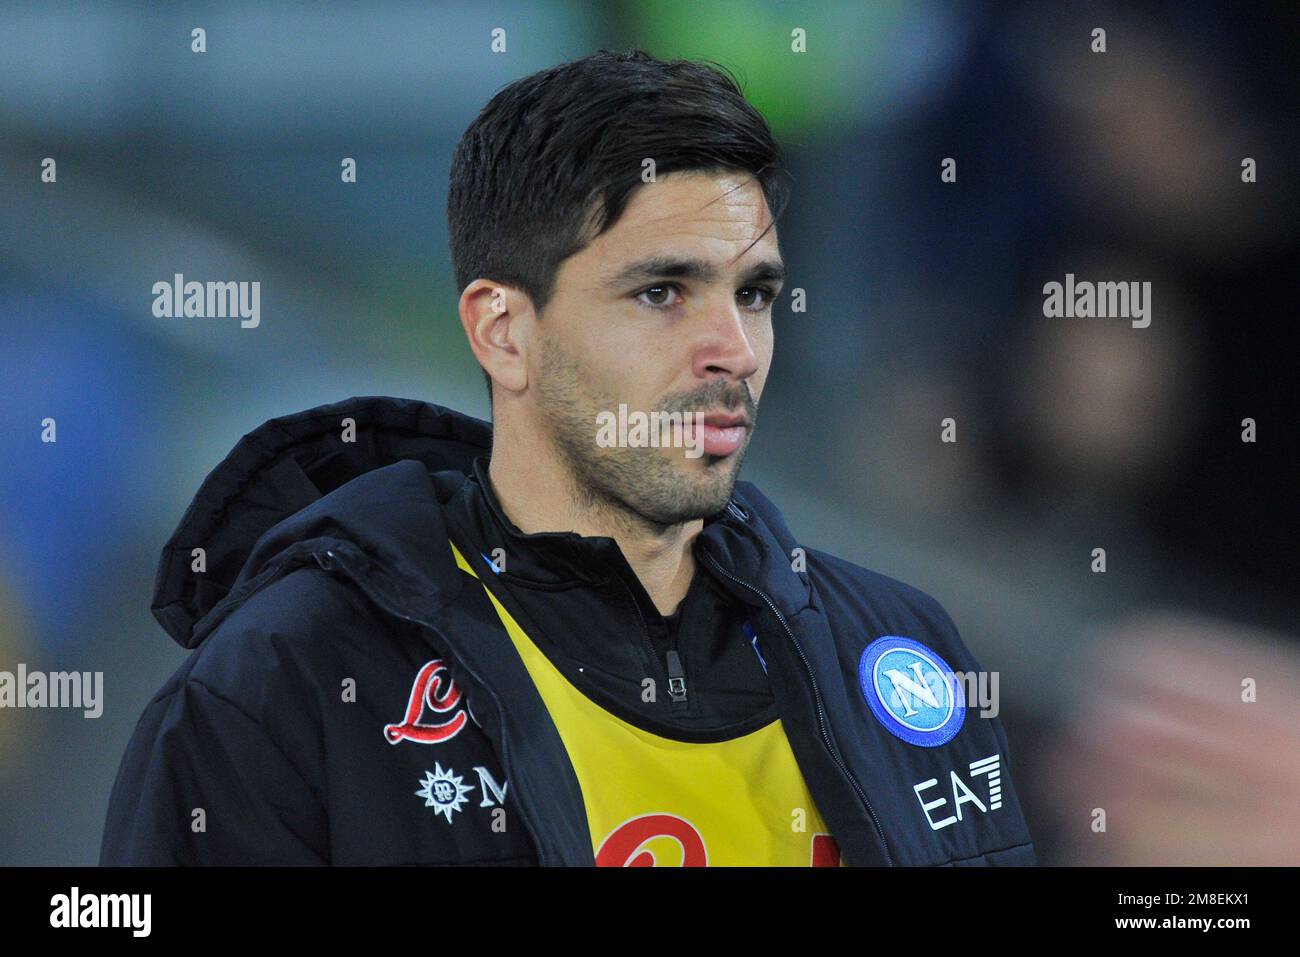 Naples, Italy. 13th Jan, 2023. Giovanni Simeone player of Napoli, during the match of the Italian Serie A league between Napoli vs Juventus final result, Napoli 5, Juventus 1, match played at the Diego Armando Maradona stadium. Credit: Vincenzo Izzo/Alamy Live News Stock Photo